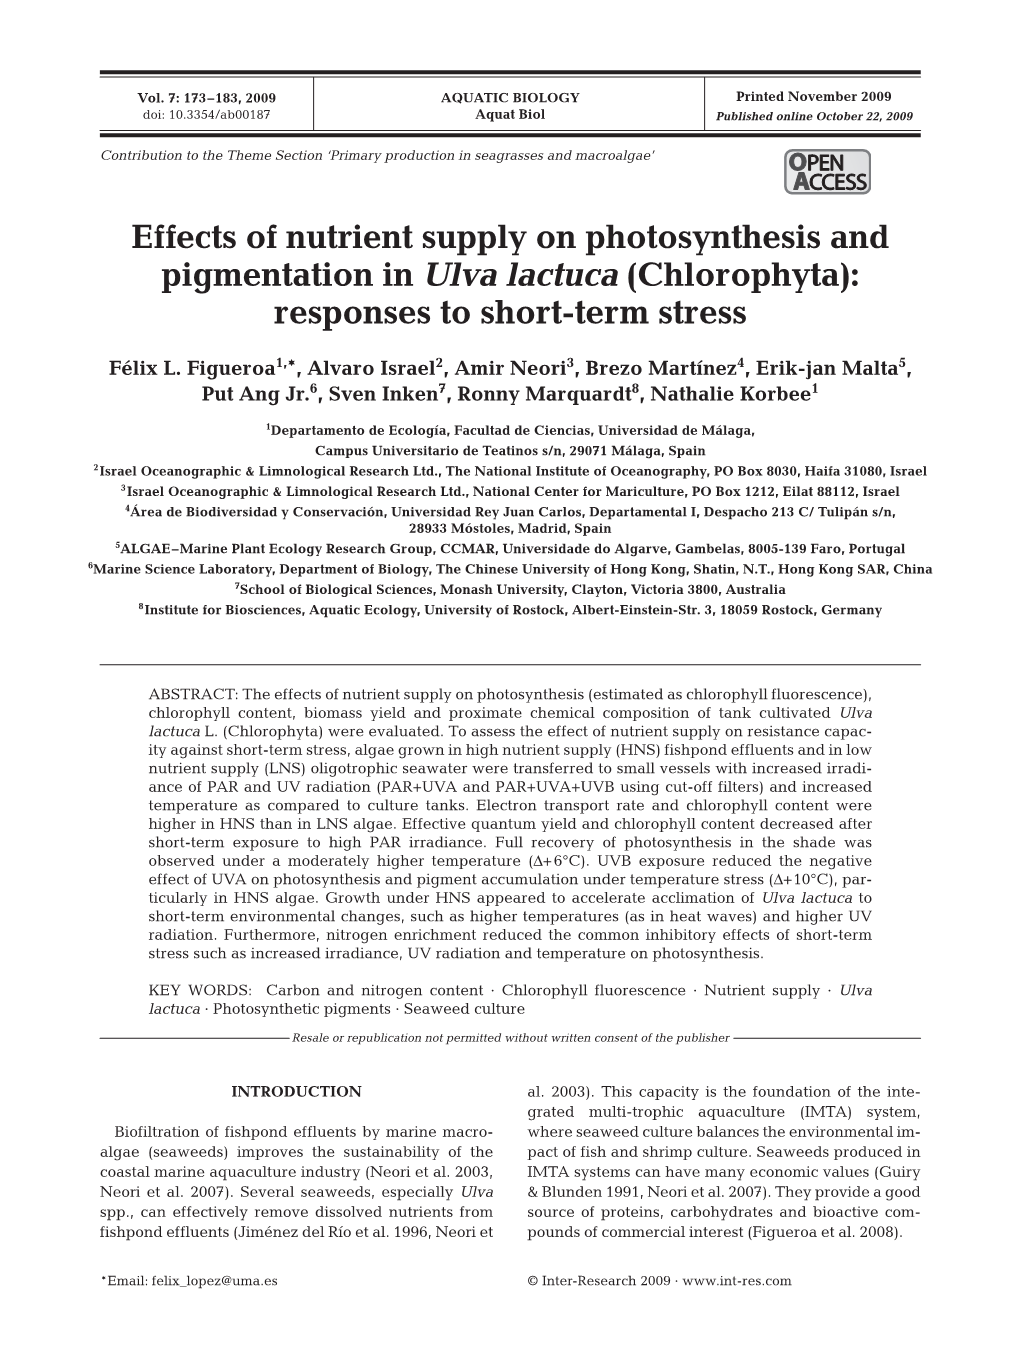 Effects of Nutrient Supply on Photosynthesis and Pigmentation in Ulva Lactuca (Chlorophyta): Responses to Short-Term Stress